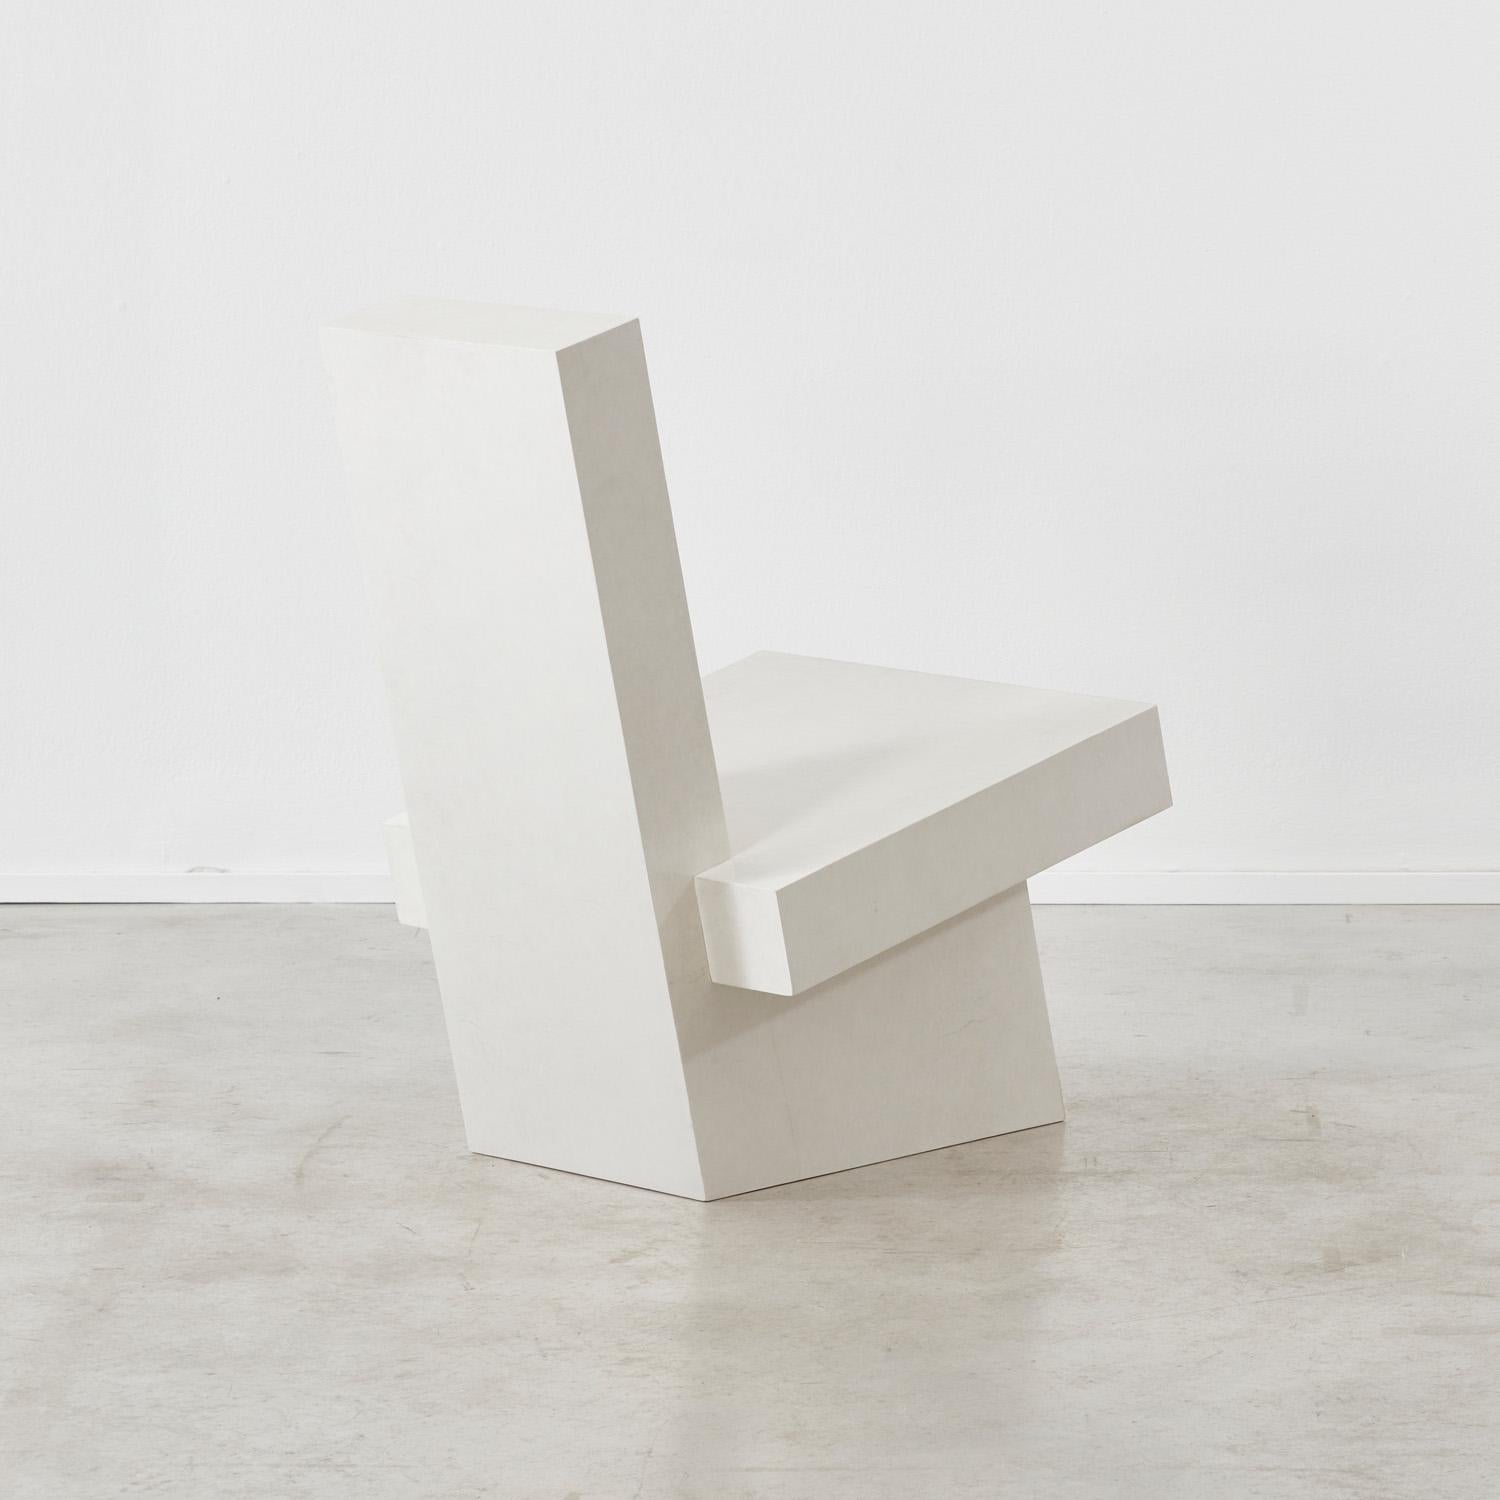 David Horan Paper Lounge Chair for Béton Brut, UK, 2022 In New Condition For Sale In London, GB